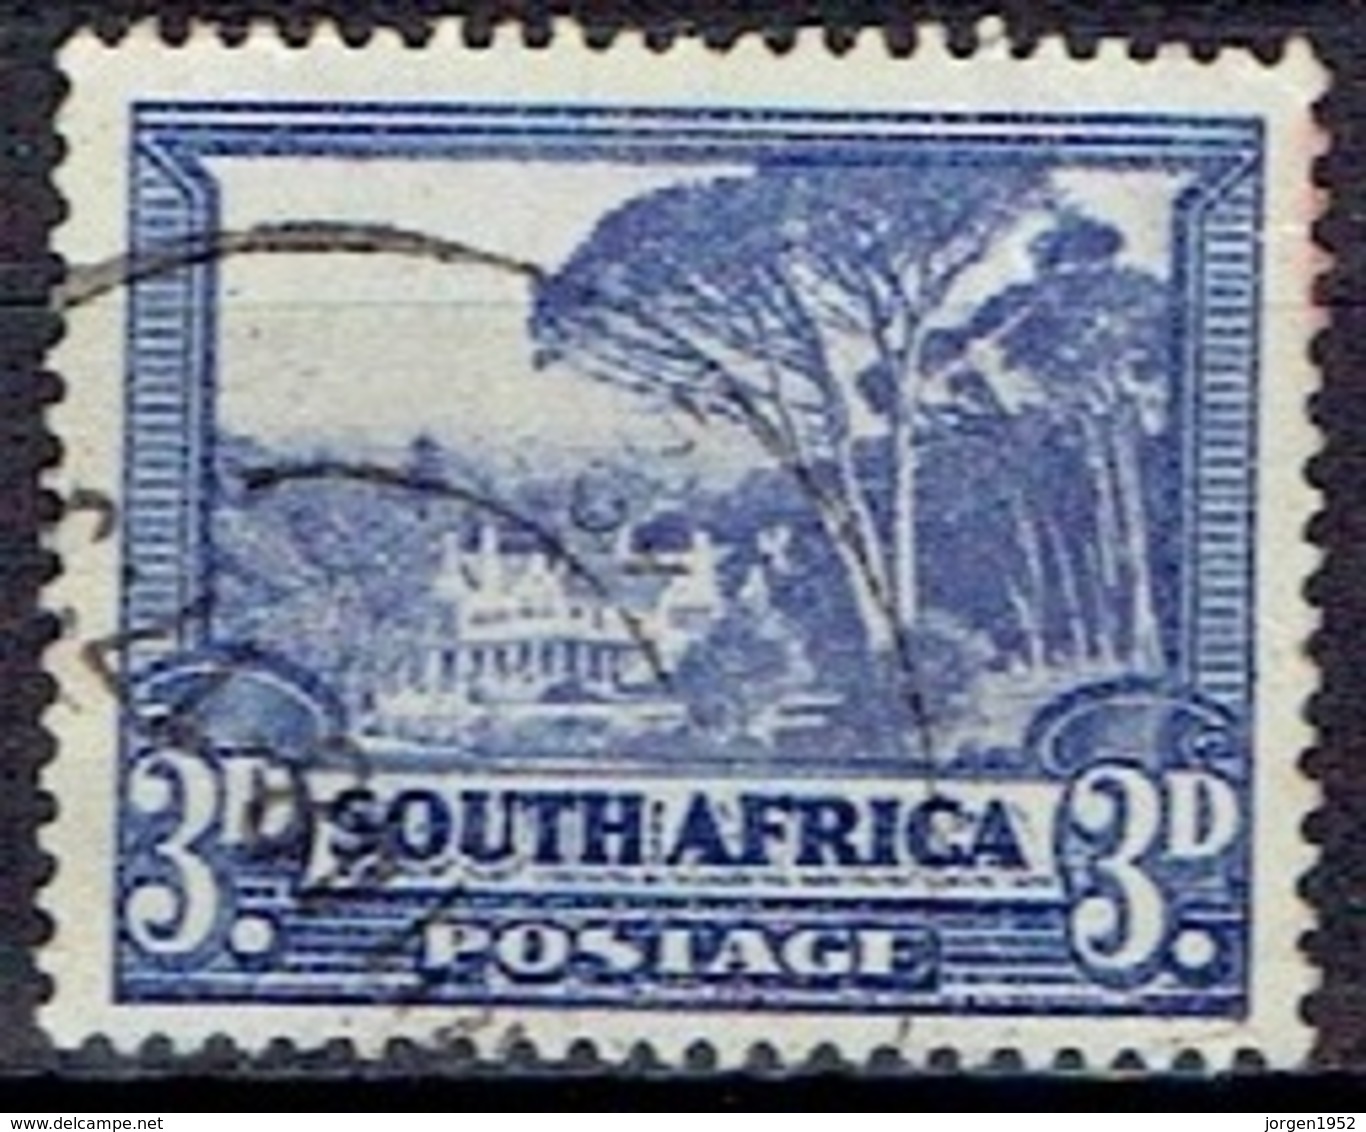 GREAT BRITAIN # SOUTH AFRICA FROM 1930-45  STAMPWORLD 56 - Nieuwe Republiek (1886-1887)